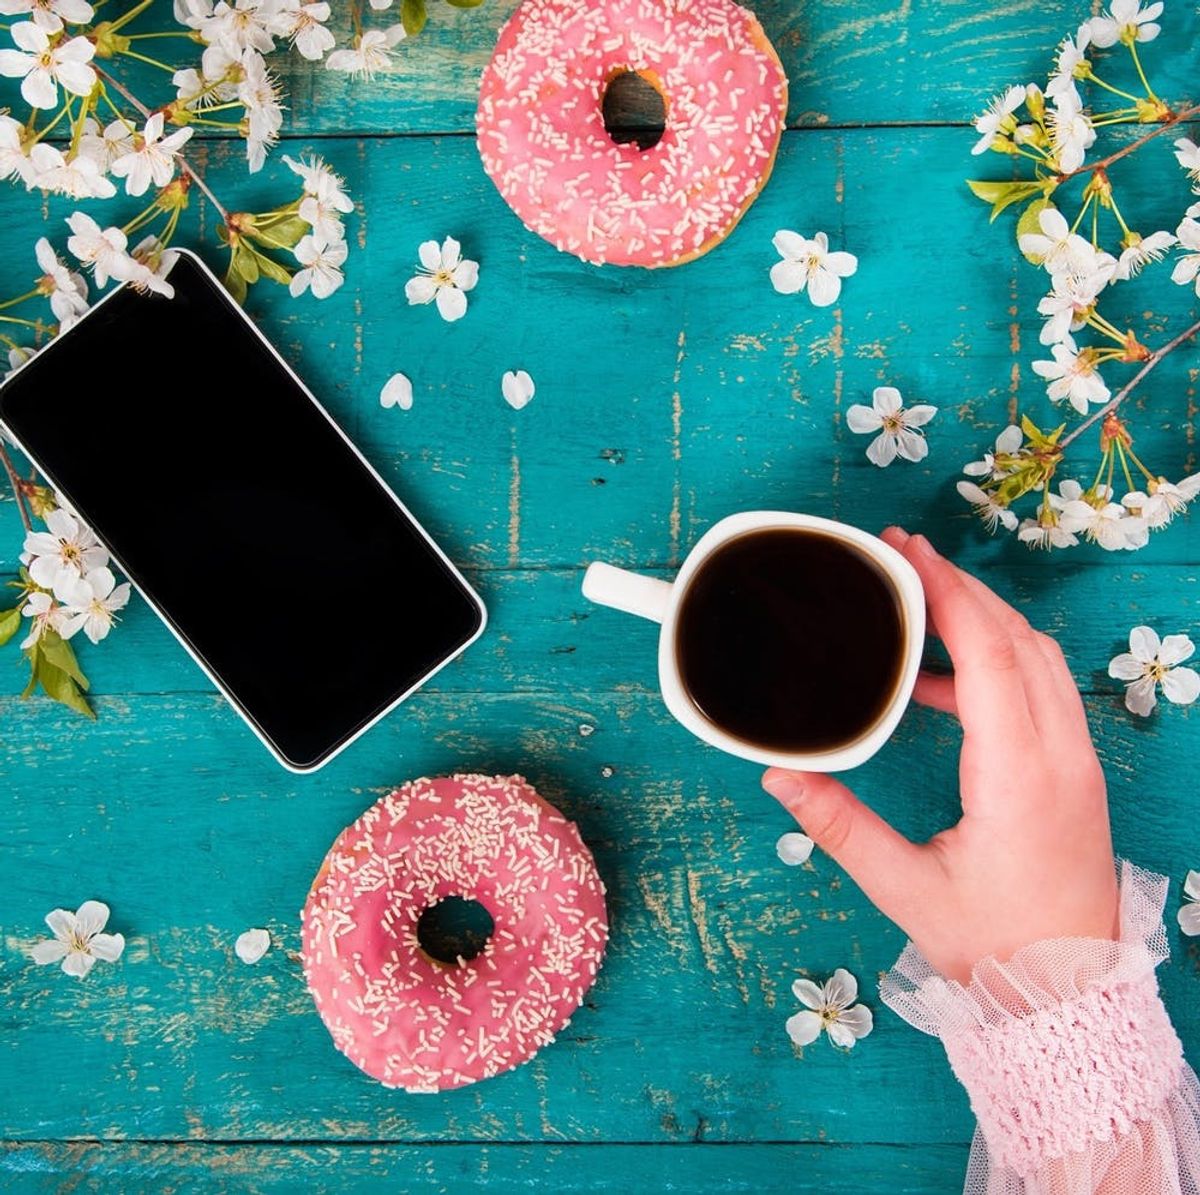 Dunkin’ Donuts Will Now Let You Order from Your Smartphone